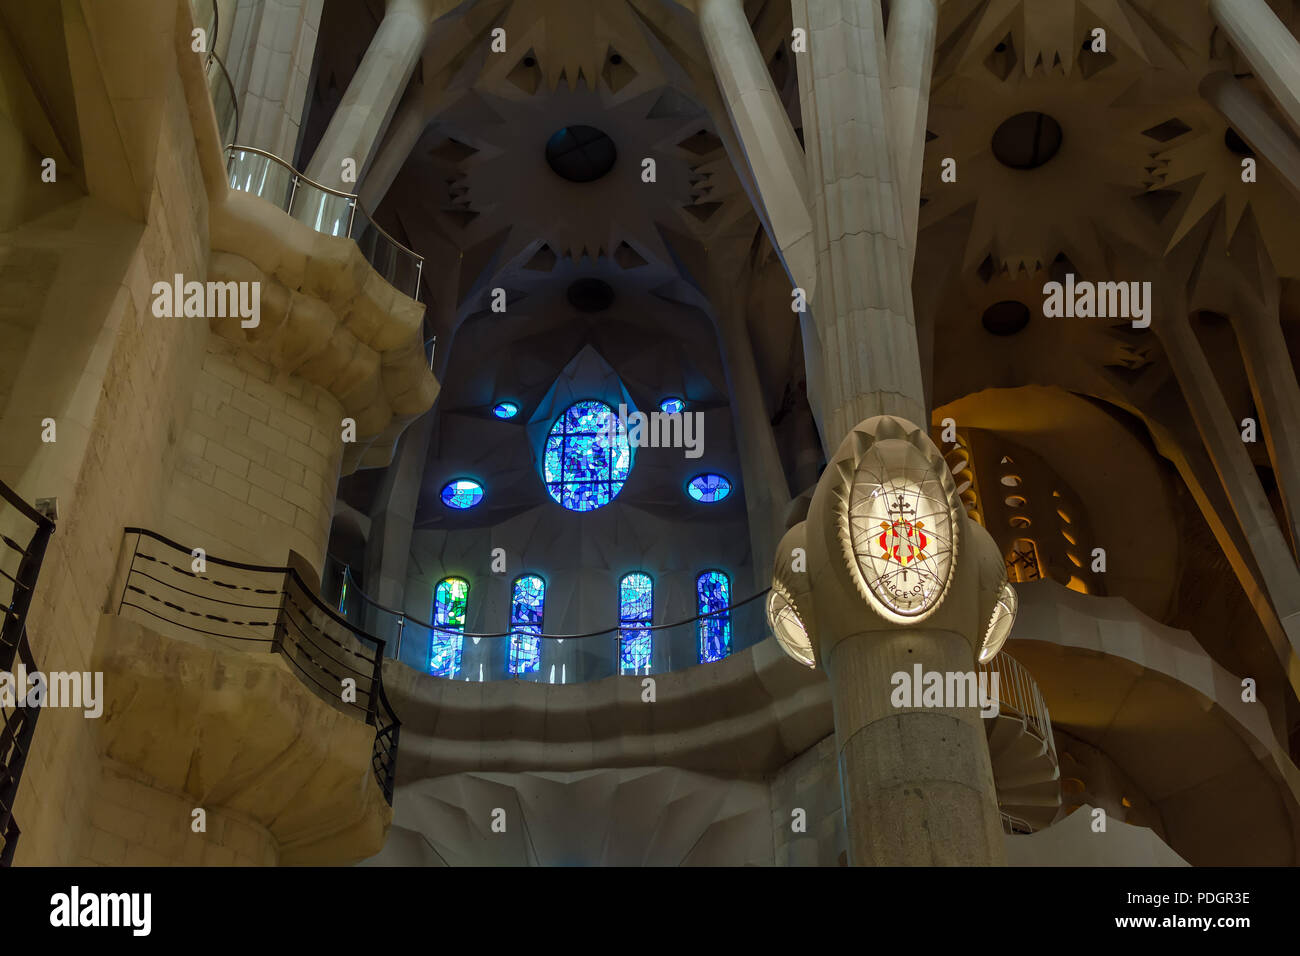 Architectural details of blue stained glass window and Barcelona lamp on column inside Sagrada Familia - large unfinished Roman Catholic church in Bar Stock Photo